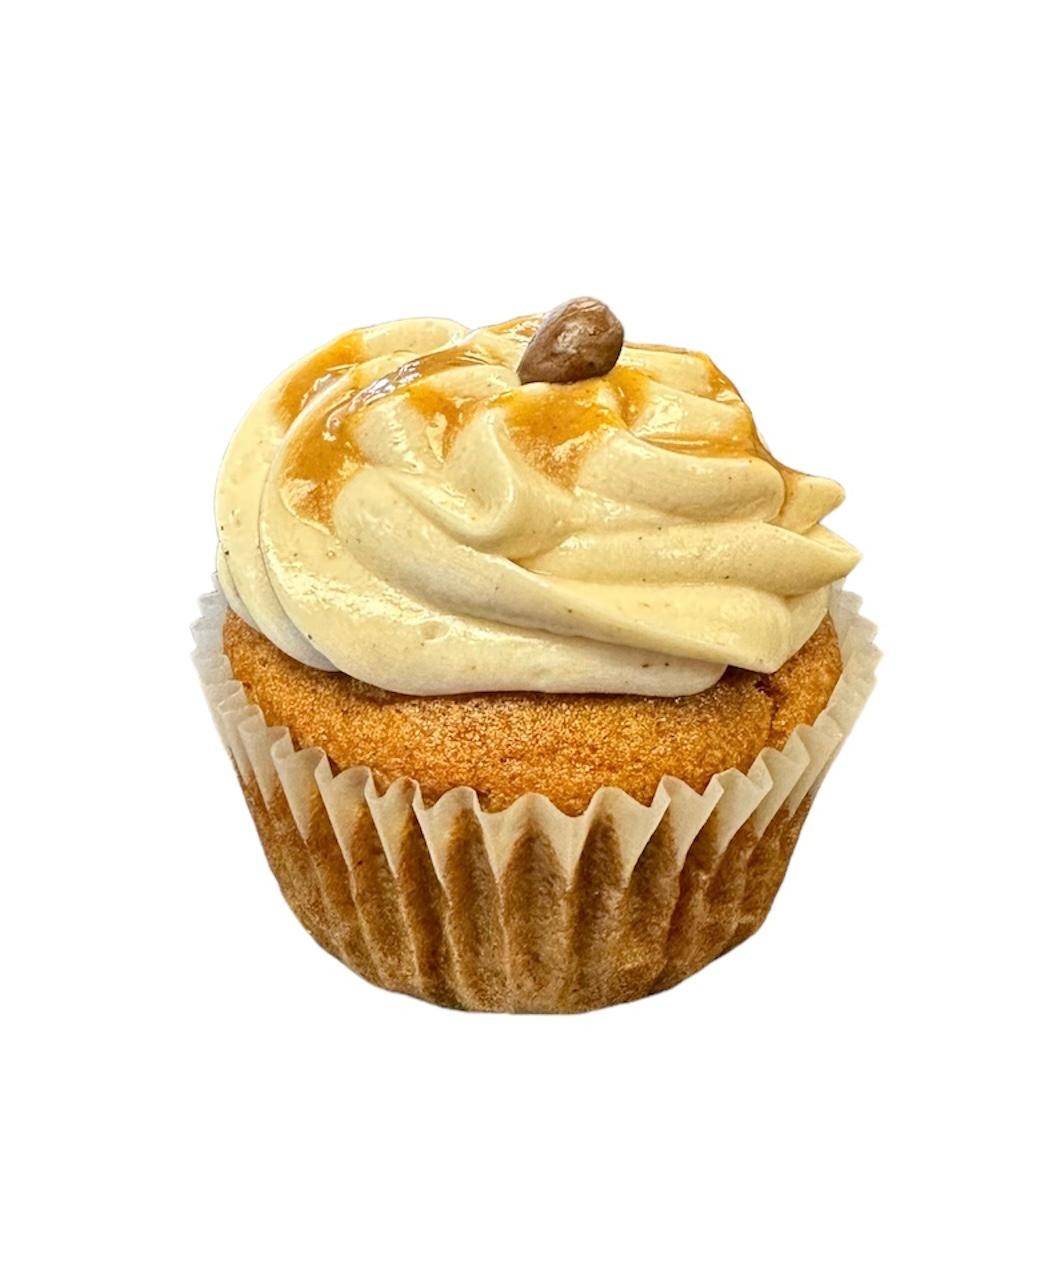 Pumpkin Spice Cupcake with Cream Cheese Frosting